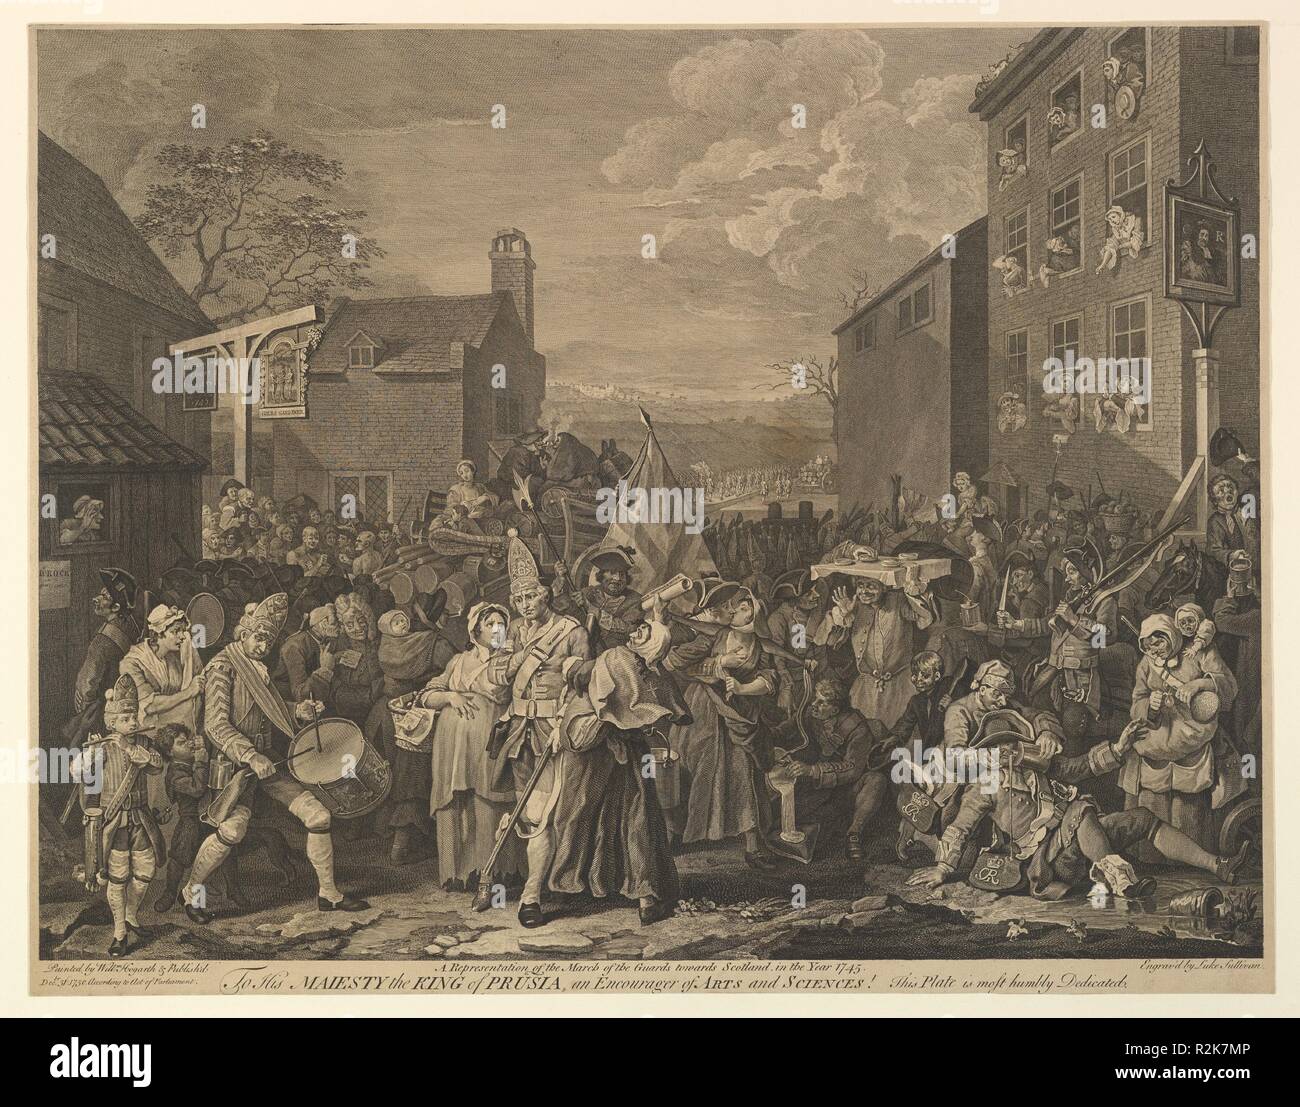 The March to Finchley (A Representation of the March of the Guards towards Scotland in the Year 1745). Artist: After William Hogarth (British, London 1697-1764 London). Dimensions: Sheet: 17 x 21 15/16 in. (43.2 x 55.8 cm). Engraver: Luke Sullivan (Irish, 1705-1771 London). Date: December 31, 1750. Museum: Metropolitan Museum of Art, New York, USA. Stock Photo